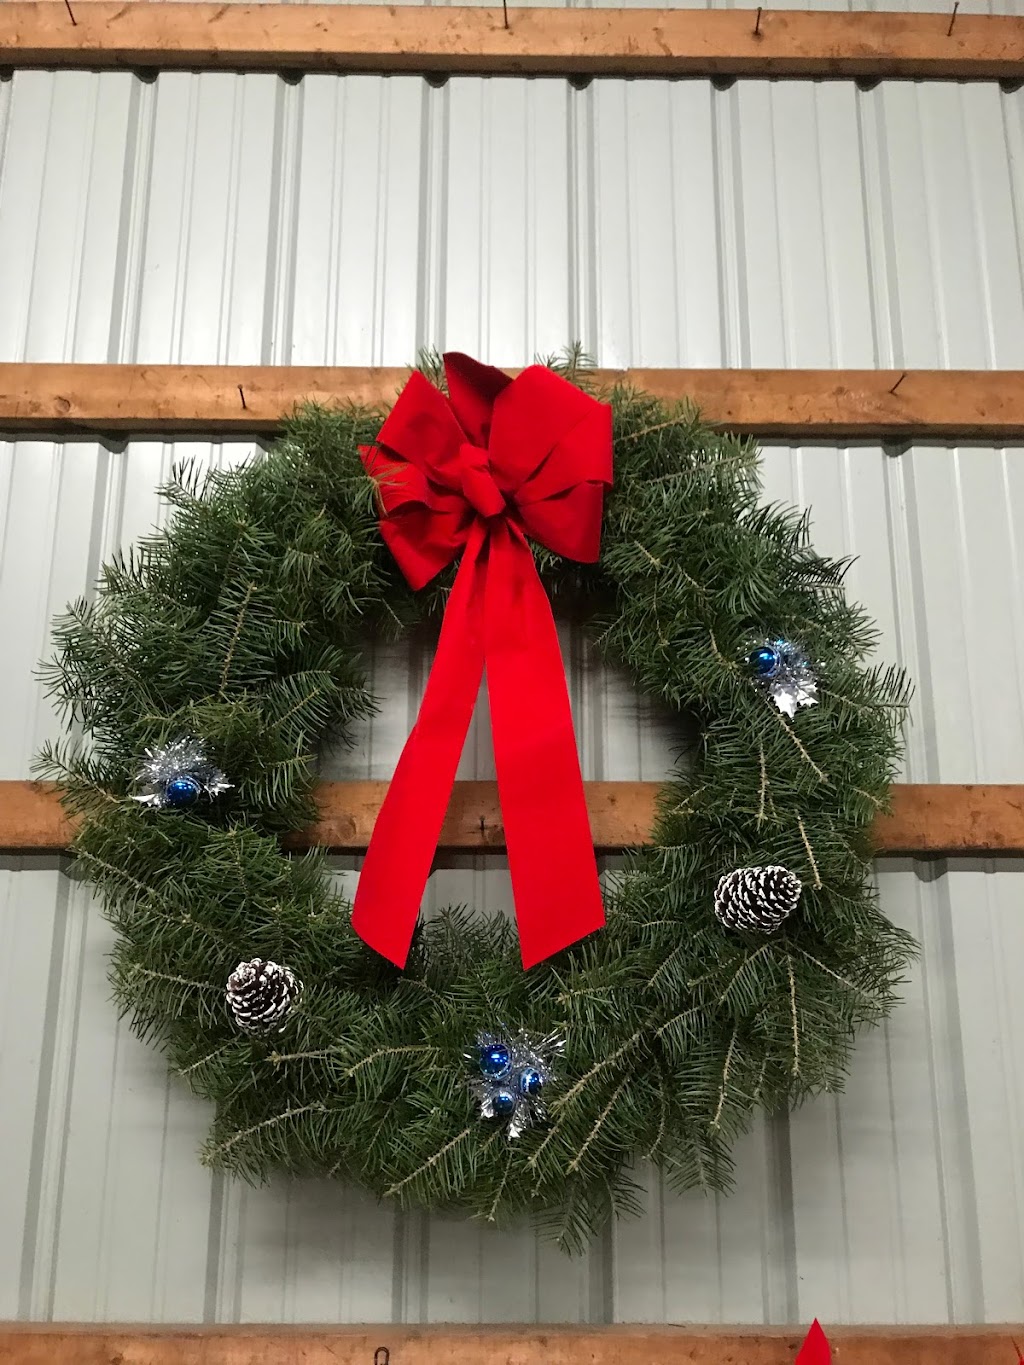 Olsommers Christmas Tree Farm | 321 Spring Hill Rd, Moscow, PA 18444 | Phone: (570) 689-4753